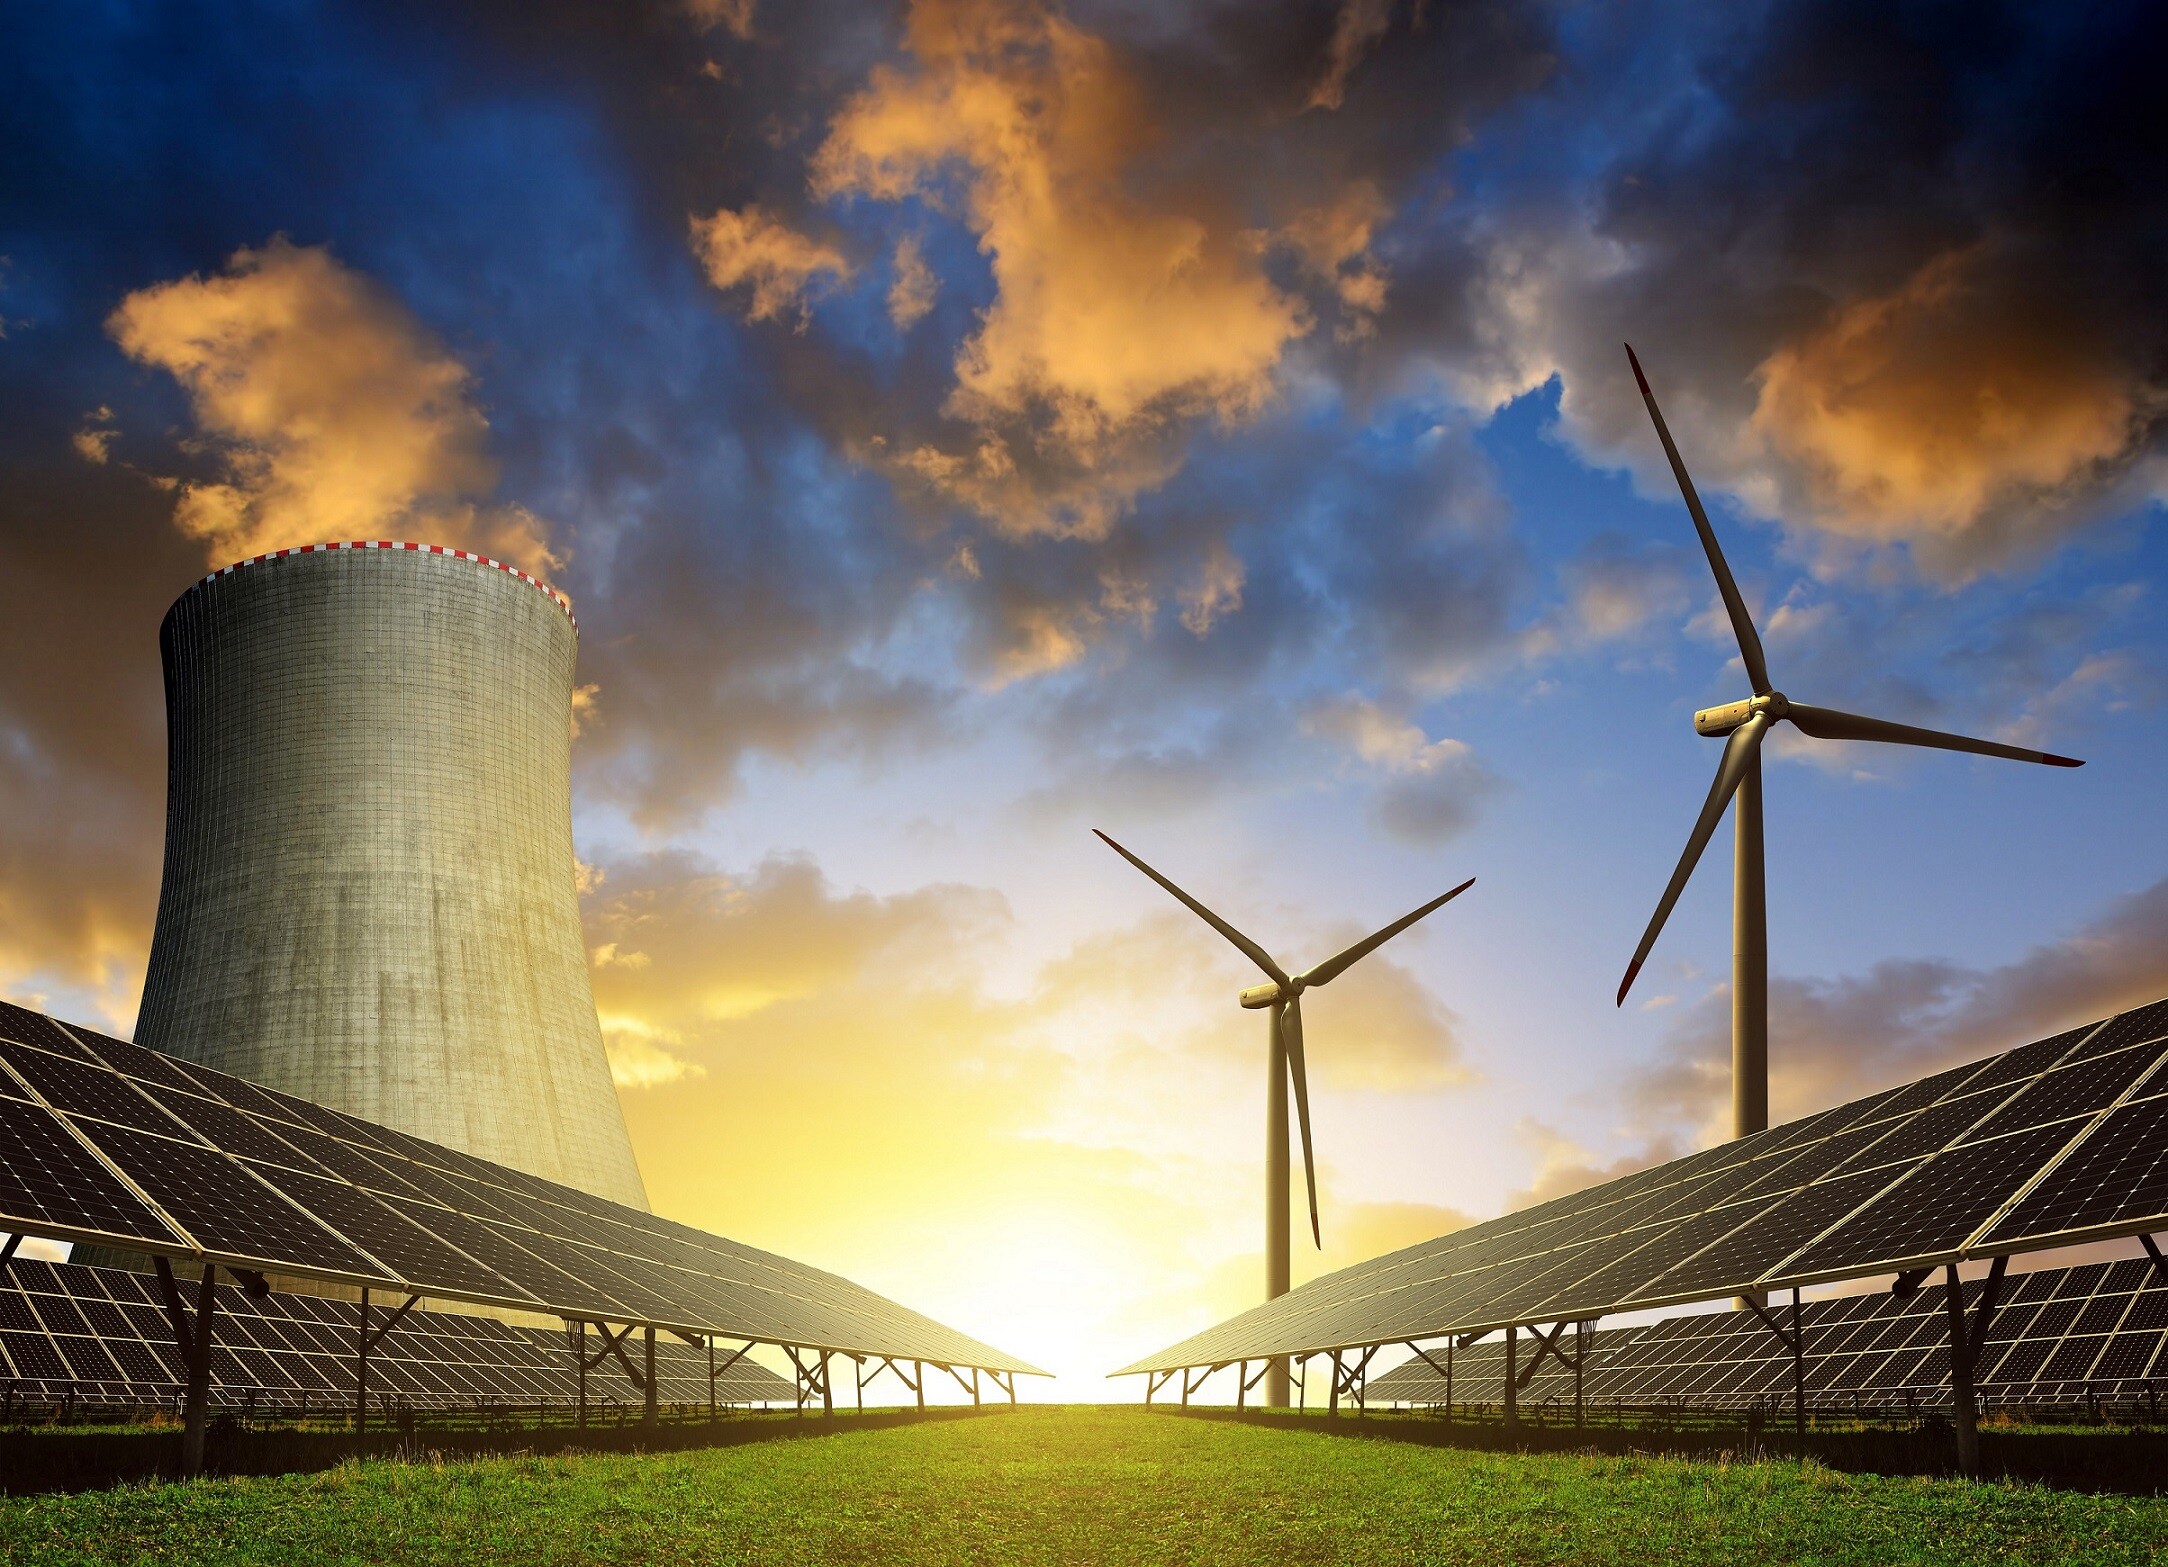 Nuclear and Renewables Must Work Together for a Clean Energy Future